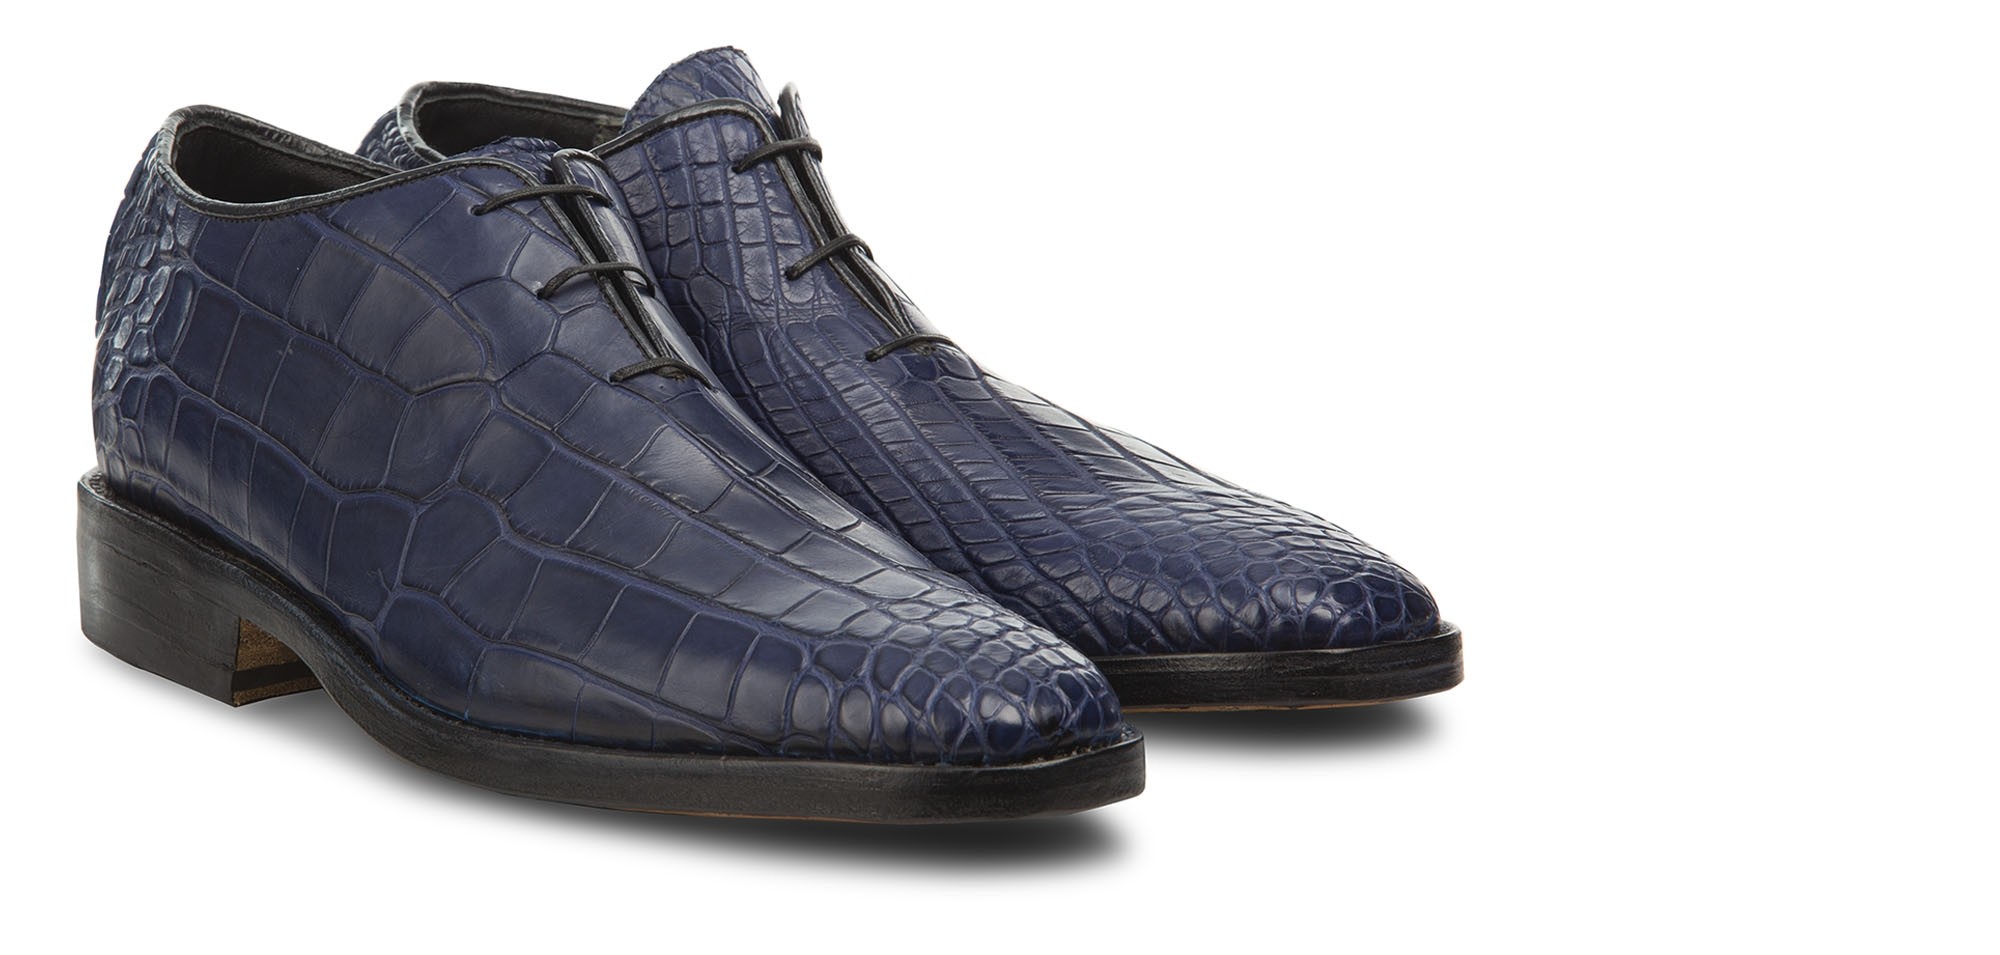 Agadir - Elevator shoes in Crocodile Leather up to 6 cm